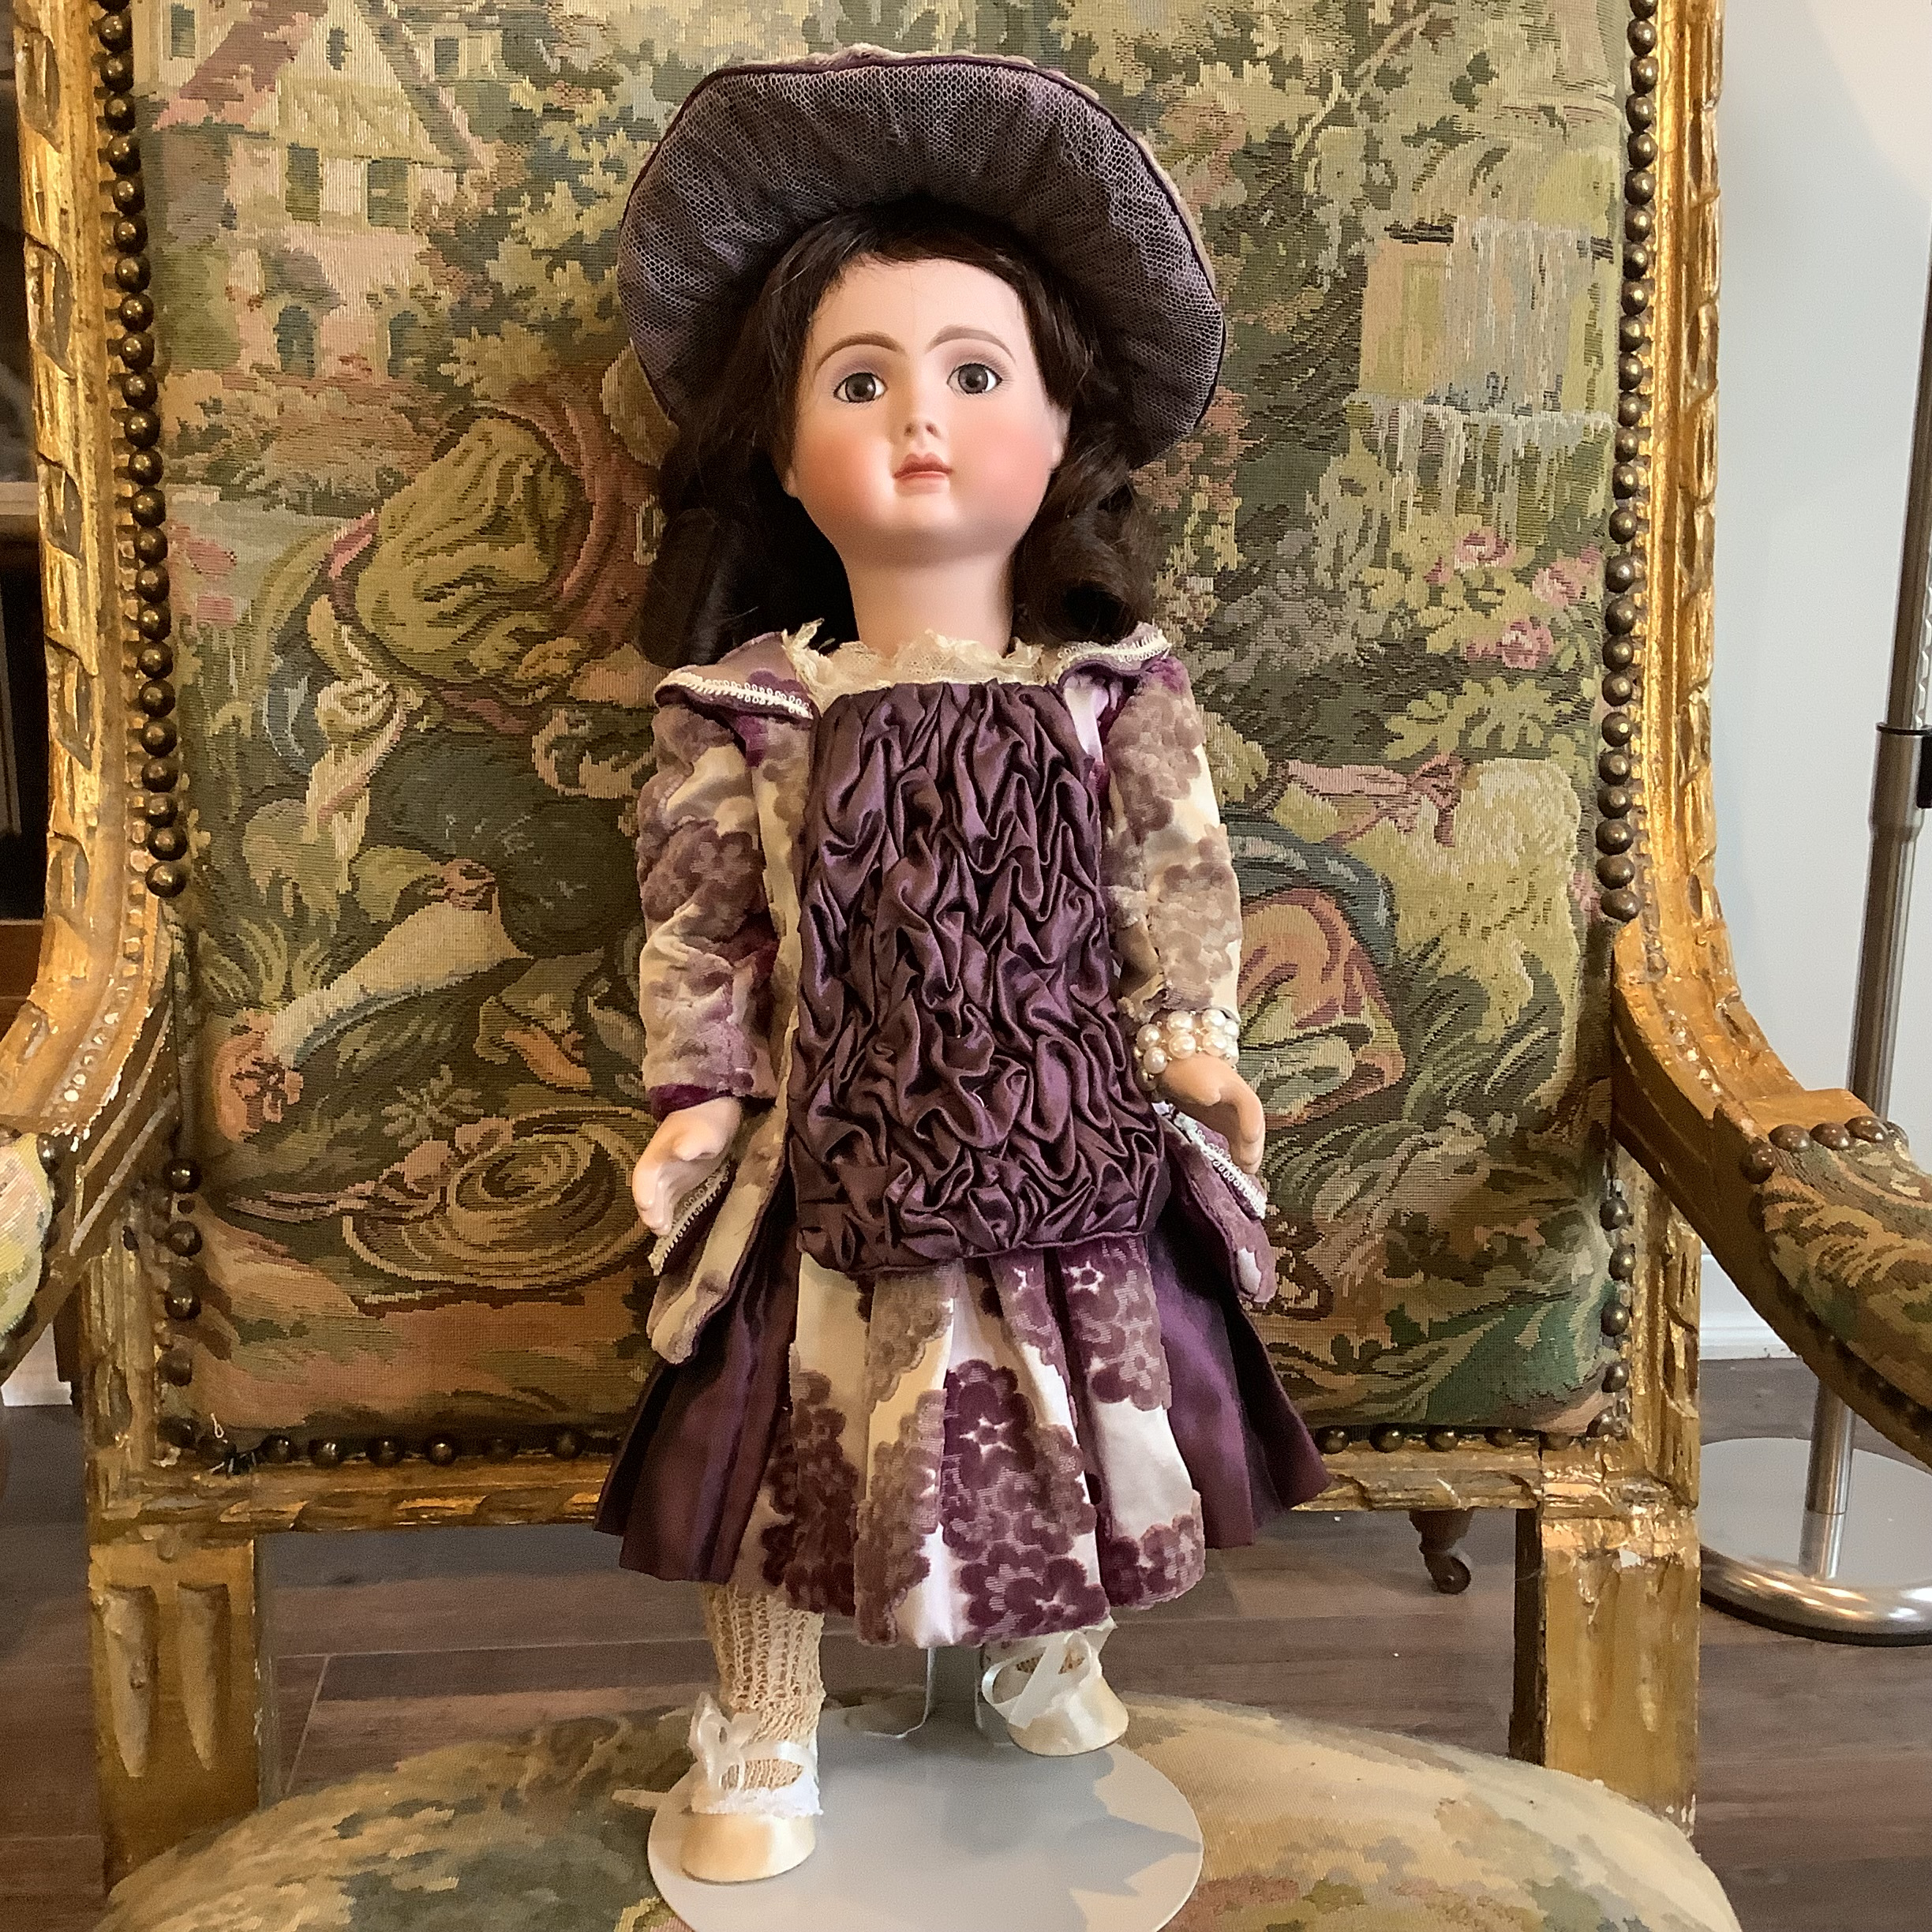 Doll with long, straight brown hair wearing a dress and matching hat in purple and beige